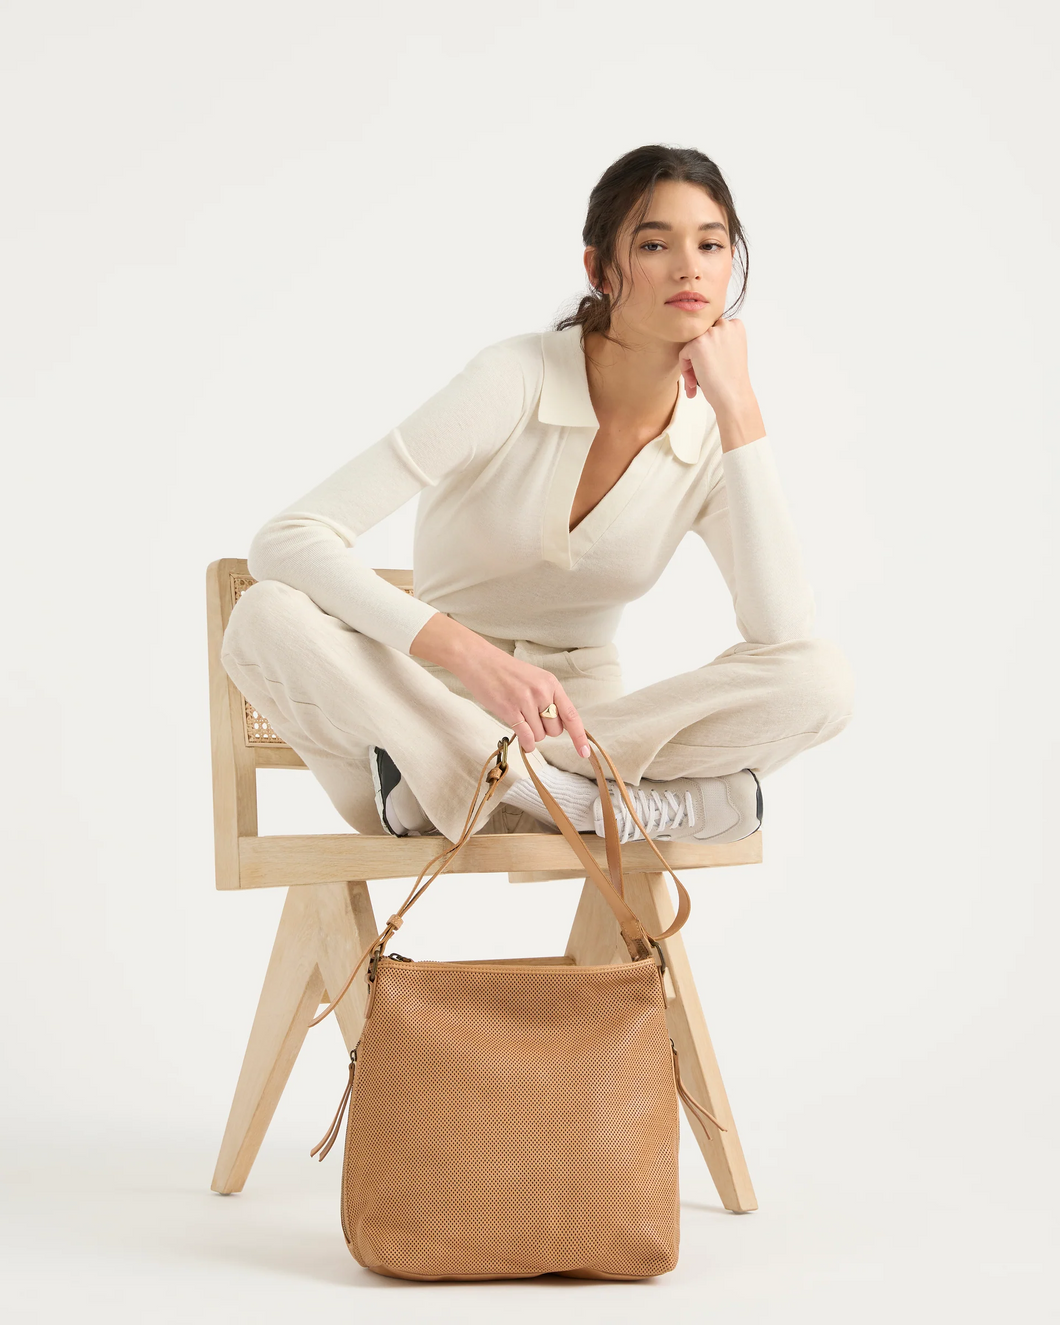 Perforated Slouchy- Tan